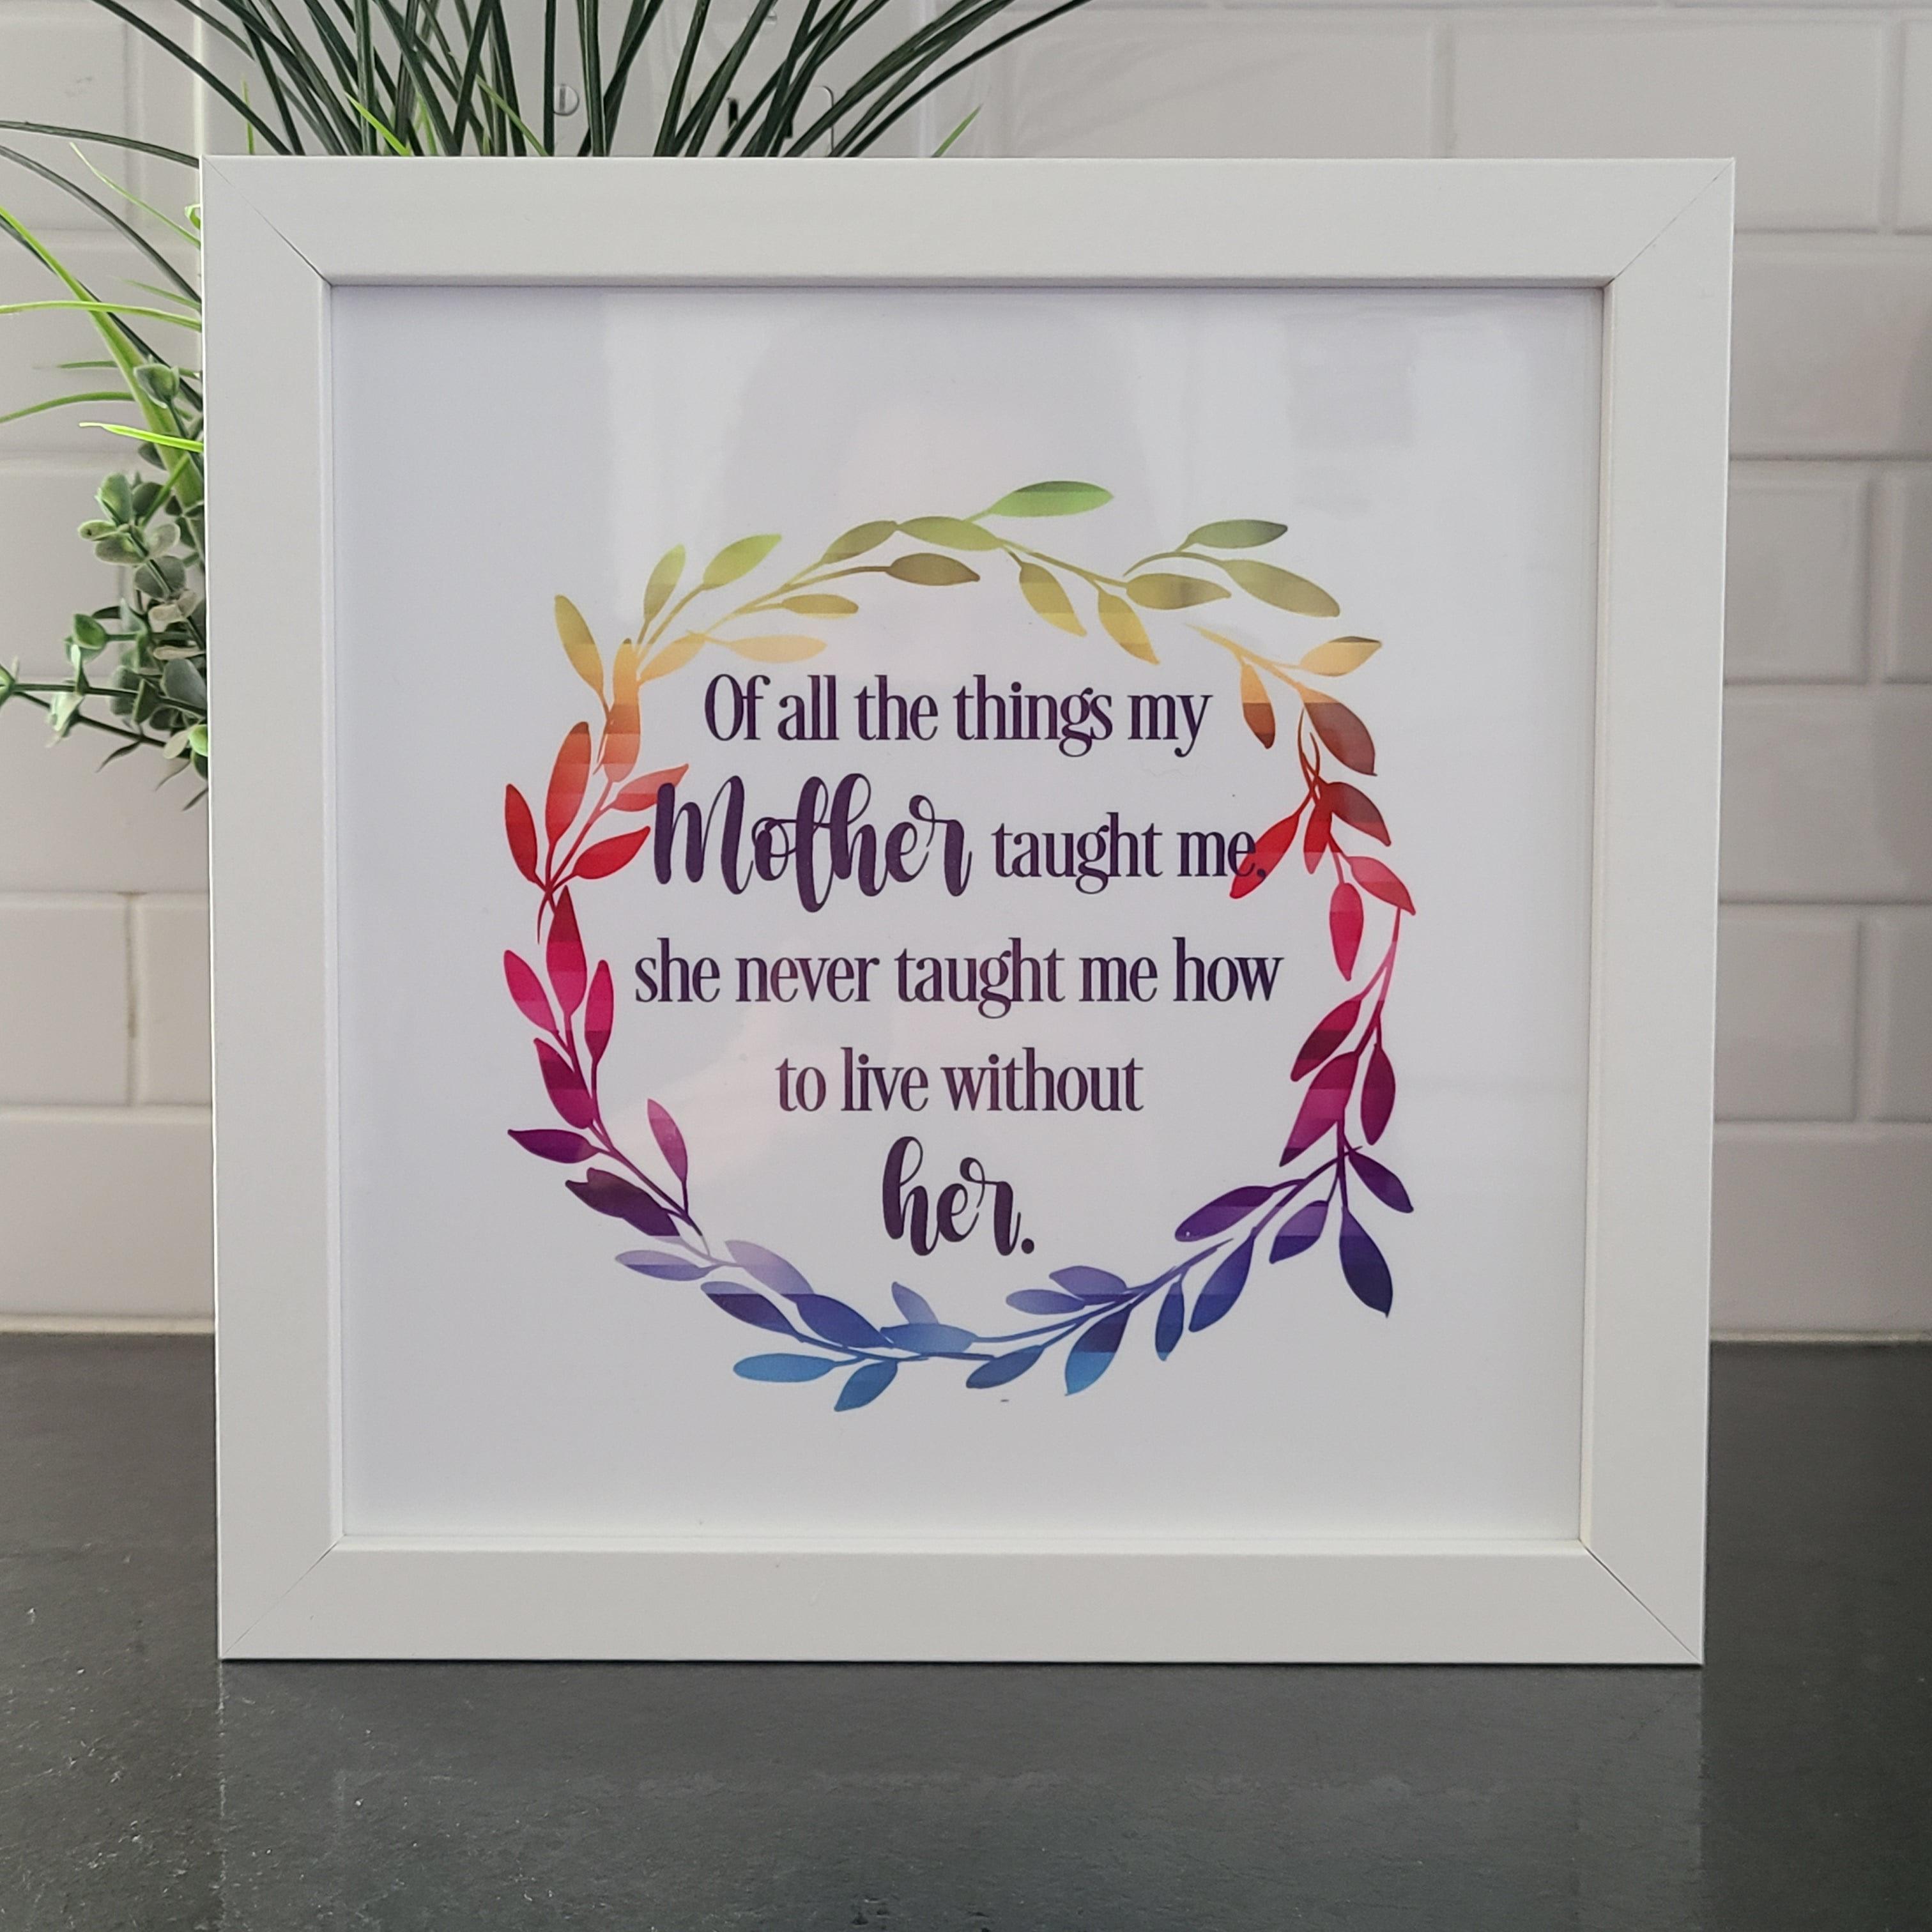 Of all the things my Mother taught me   - Framed Eight inch Tile